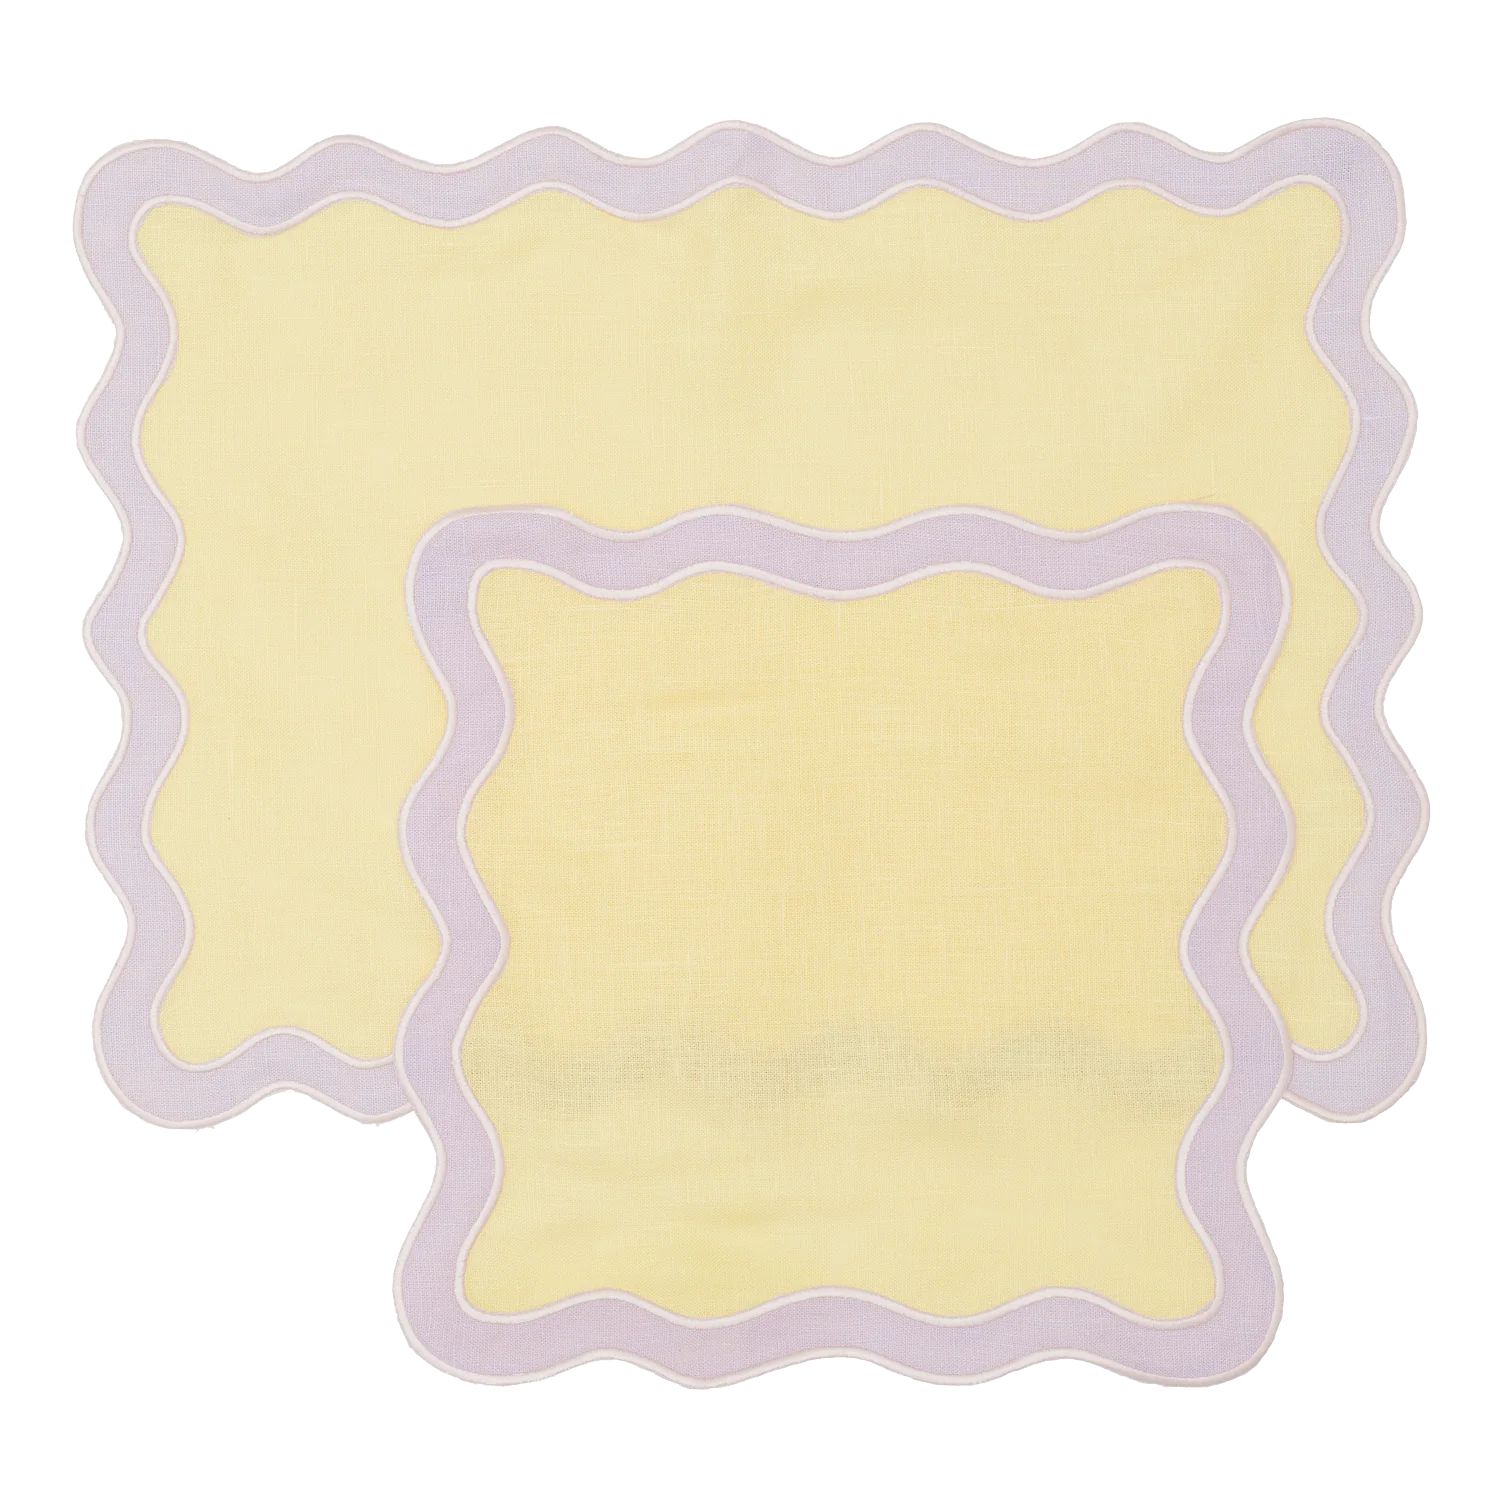 Lemon and Lilac Scalloped Napkin and Placemat Set | In the Roundhouse